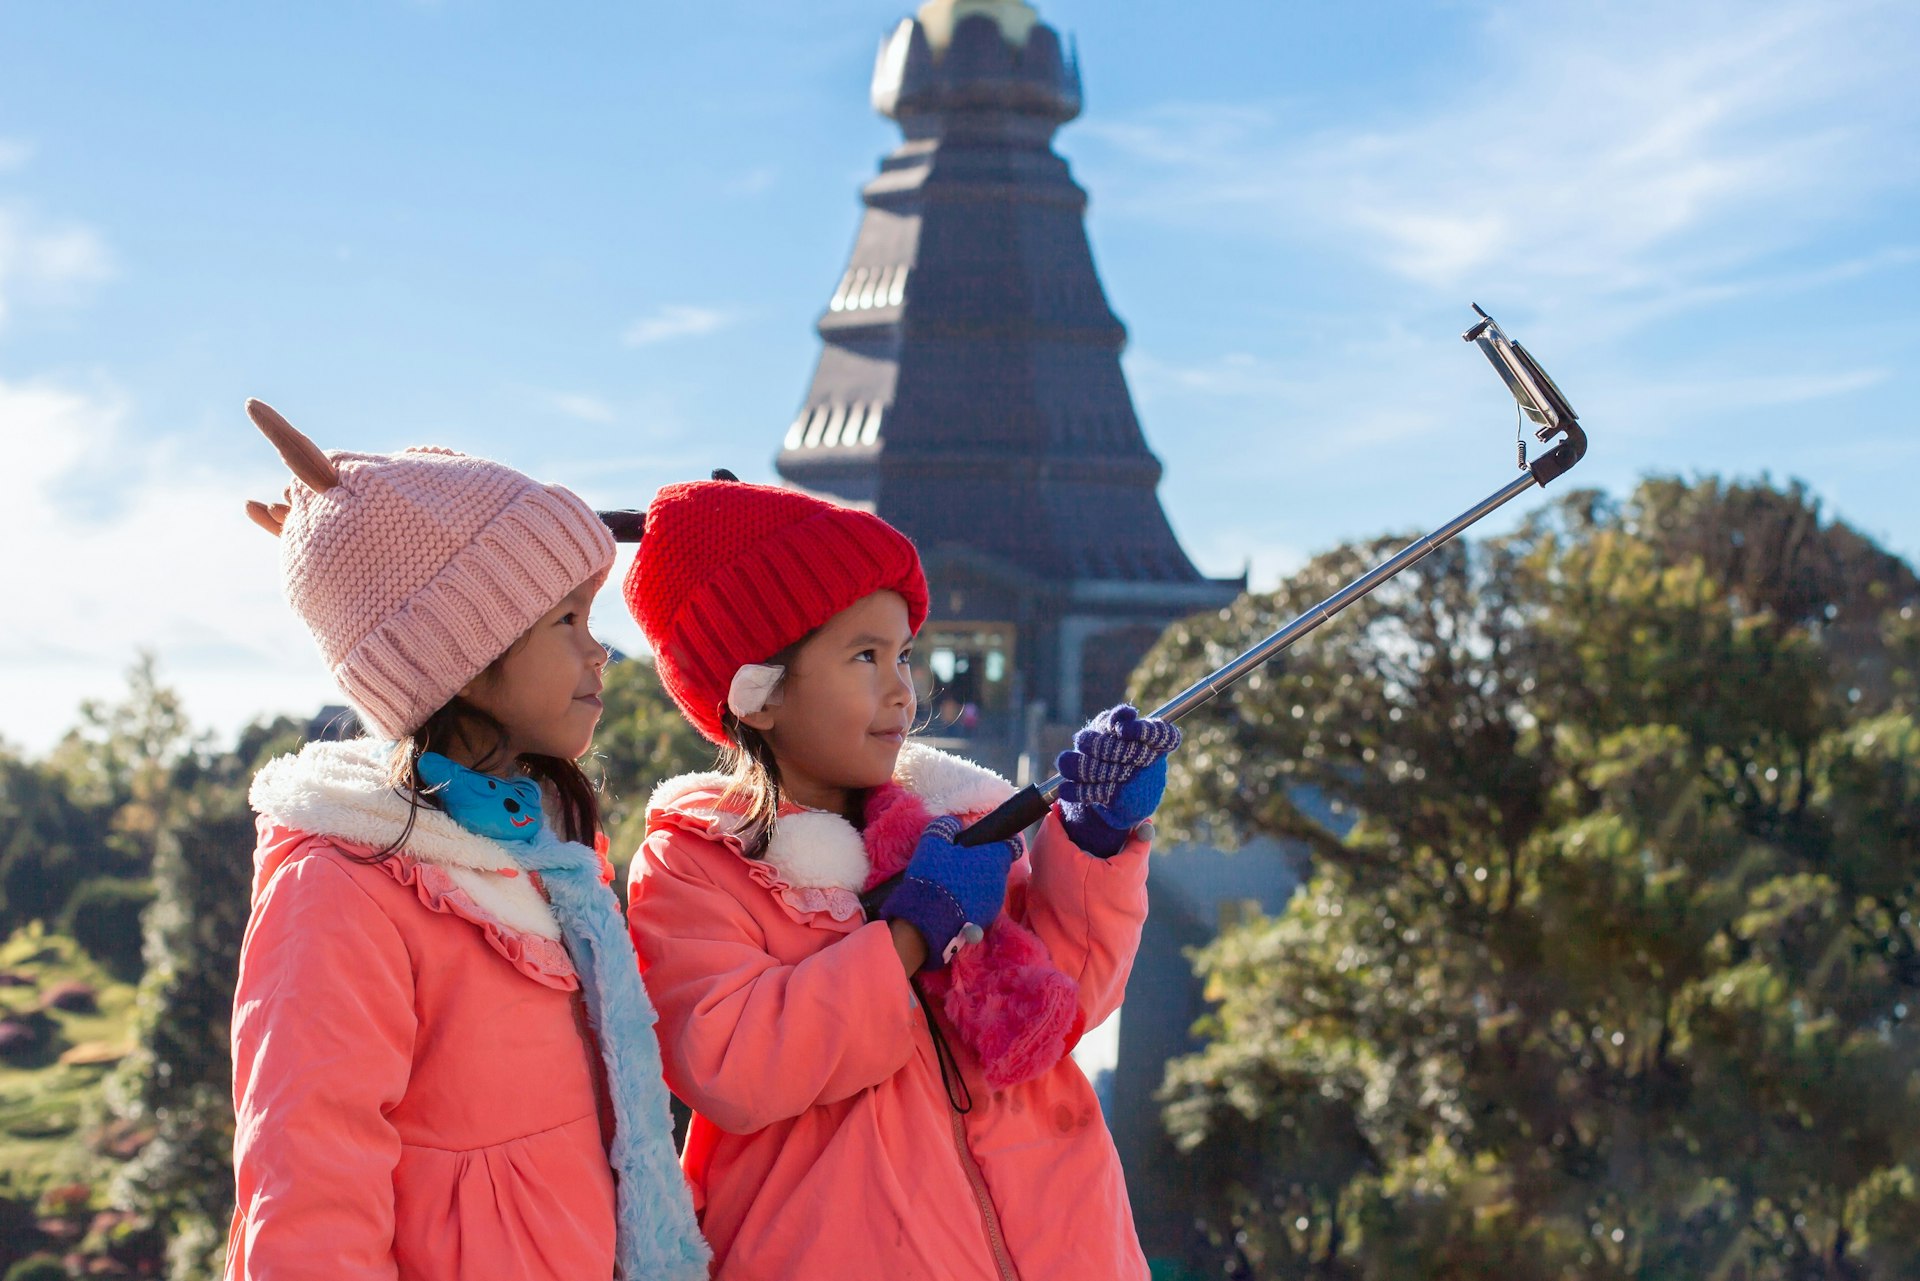 Two young children, dressed in coats and furry hats, take a selfie together in Chiang Mai, with a temple stupa visible in the background.